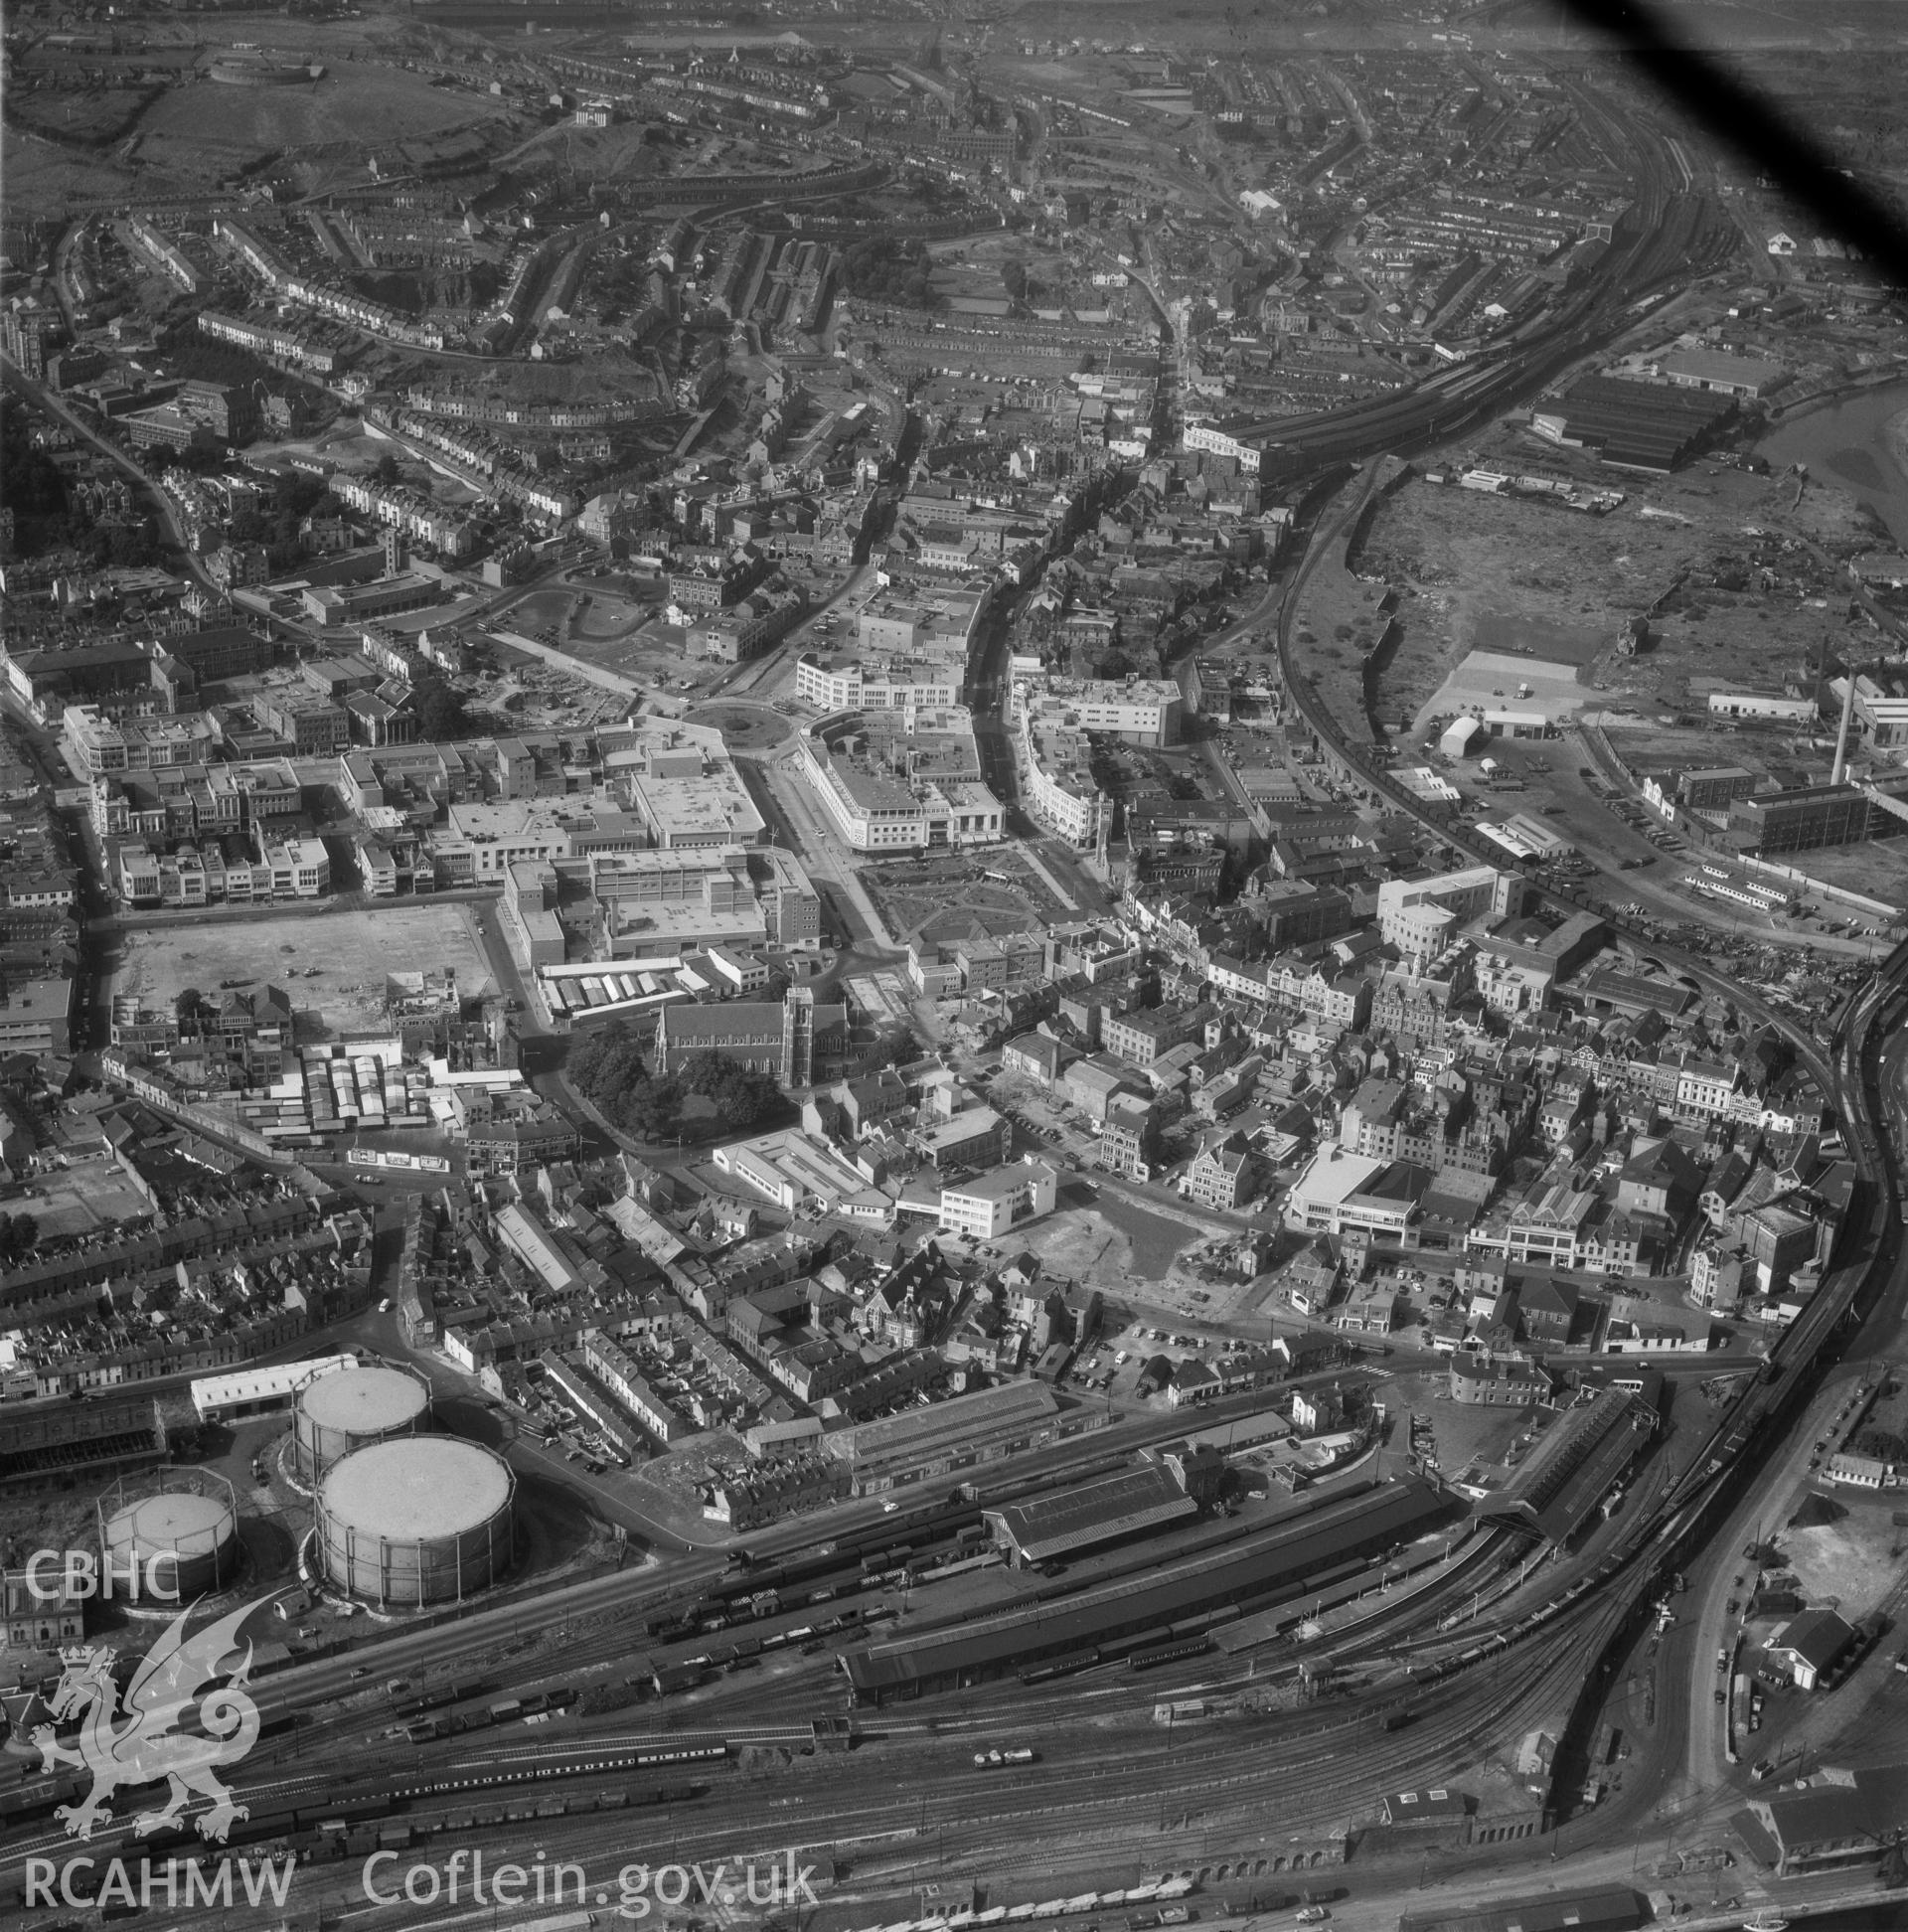 Black and white oblique aerial photograph showing Swansea, from Aerofilms album Swansea no W30, taken by Aerofilms Ltd and dated 1959.